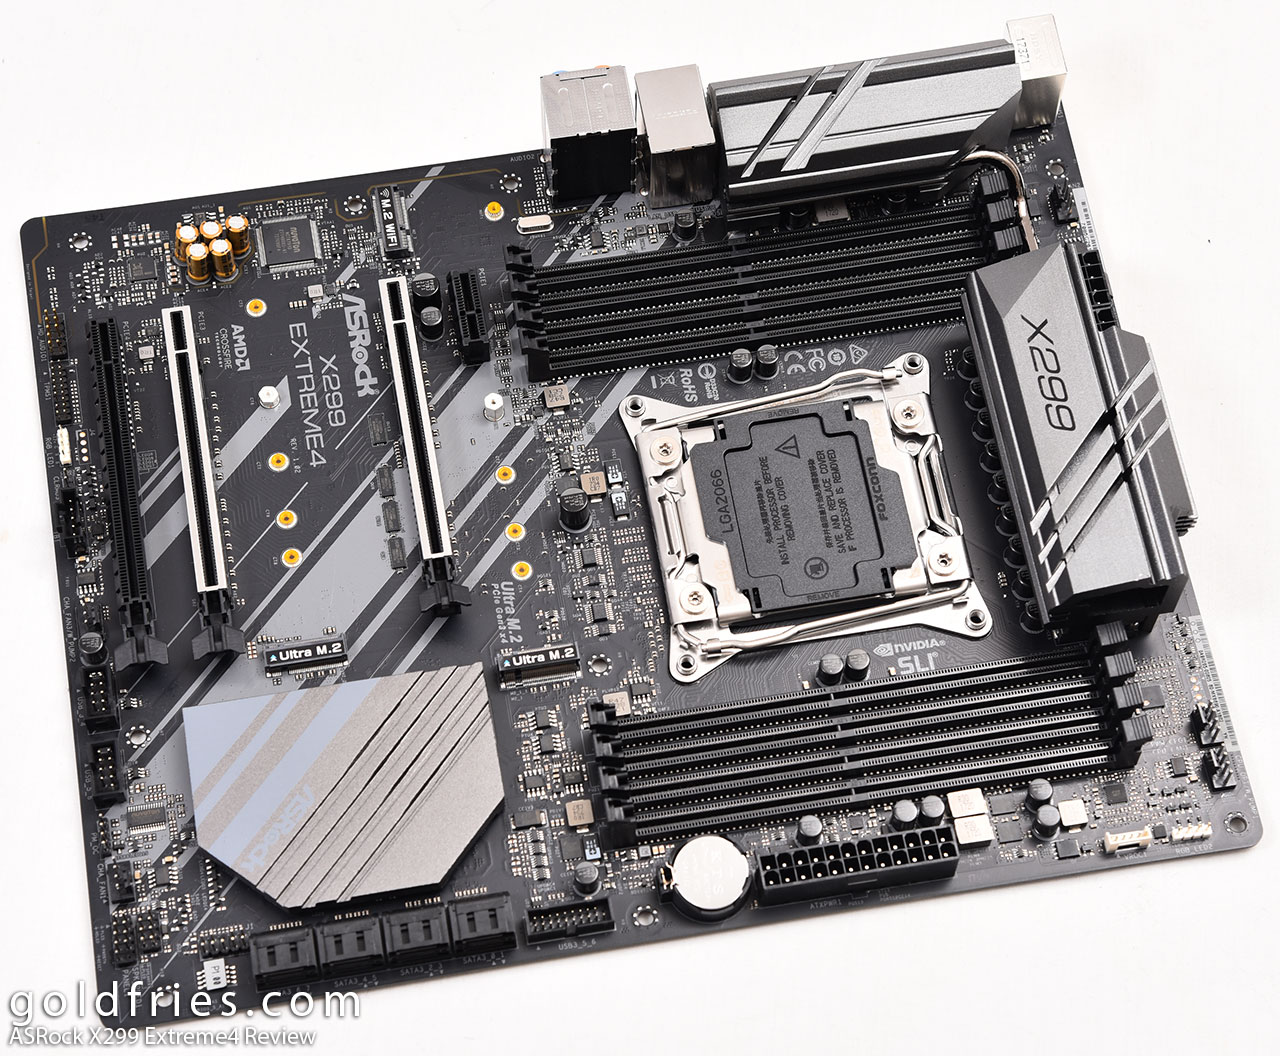 Mount Bank currency banjo ASRock X299 Extreme4 Review – goldfries